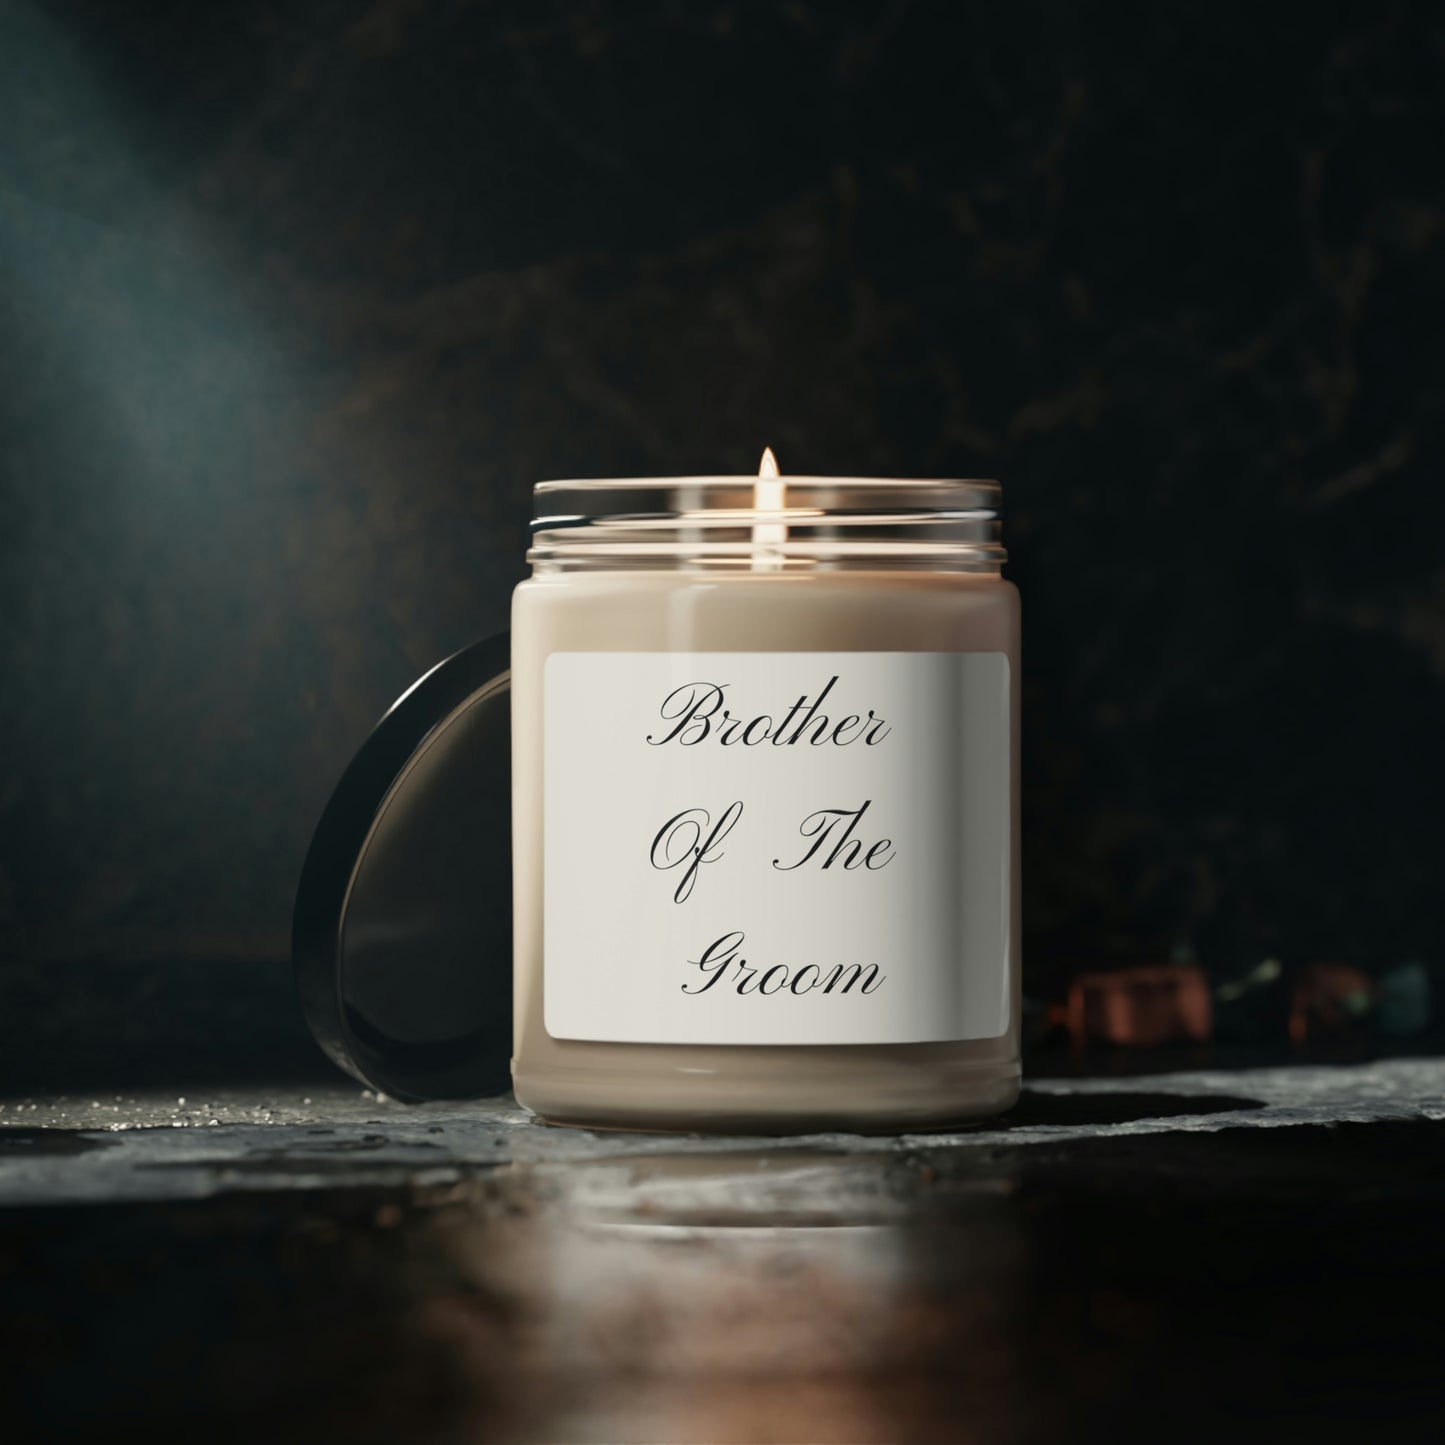 Brother Of The Groom ~Scented Soy Candle, 9oz